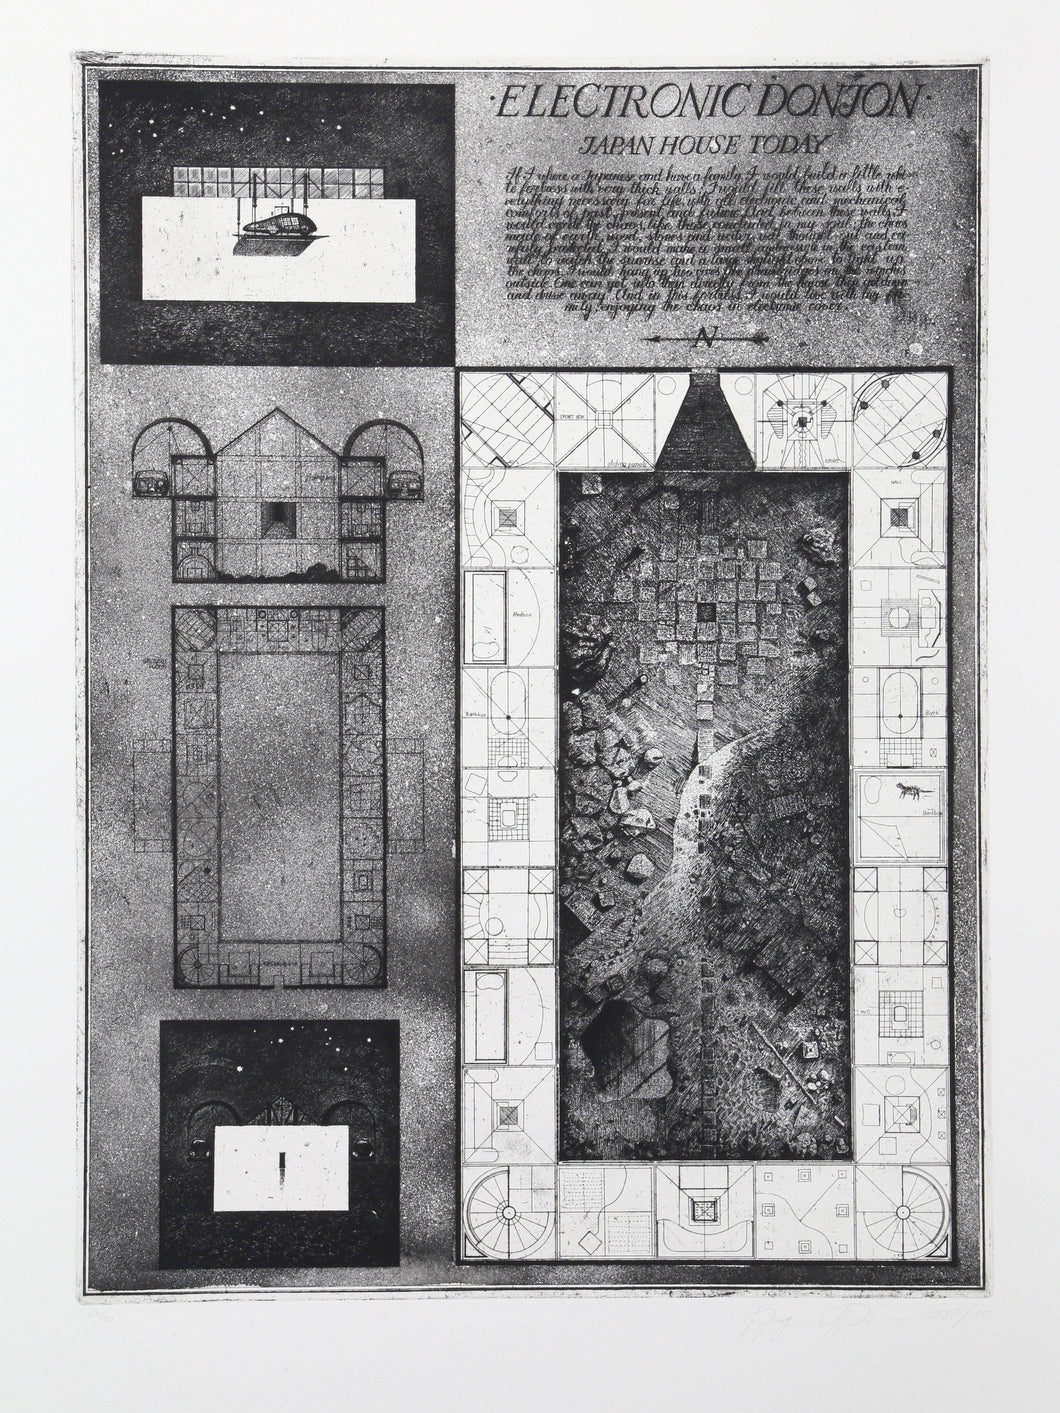 Electric Donjon from Brodsky and Utkin: Projects 1981 - 1990 Etching | Alexander Brodsky and Ilya Utkin,{{product.type}}